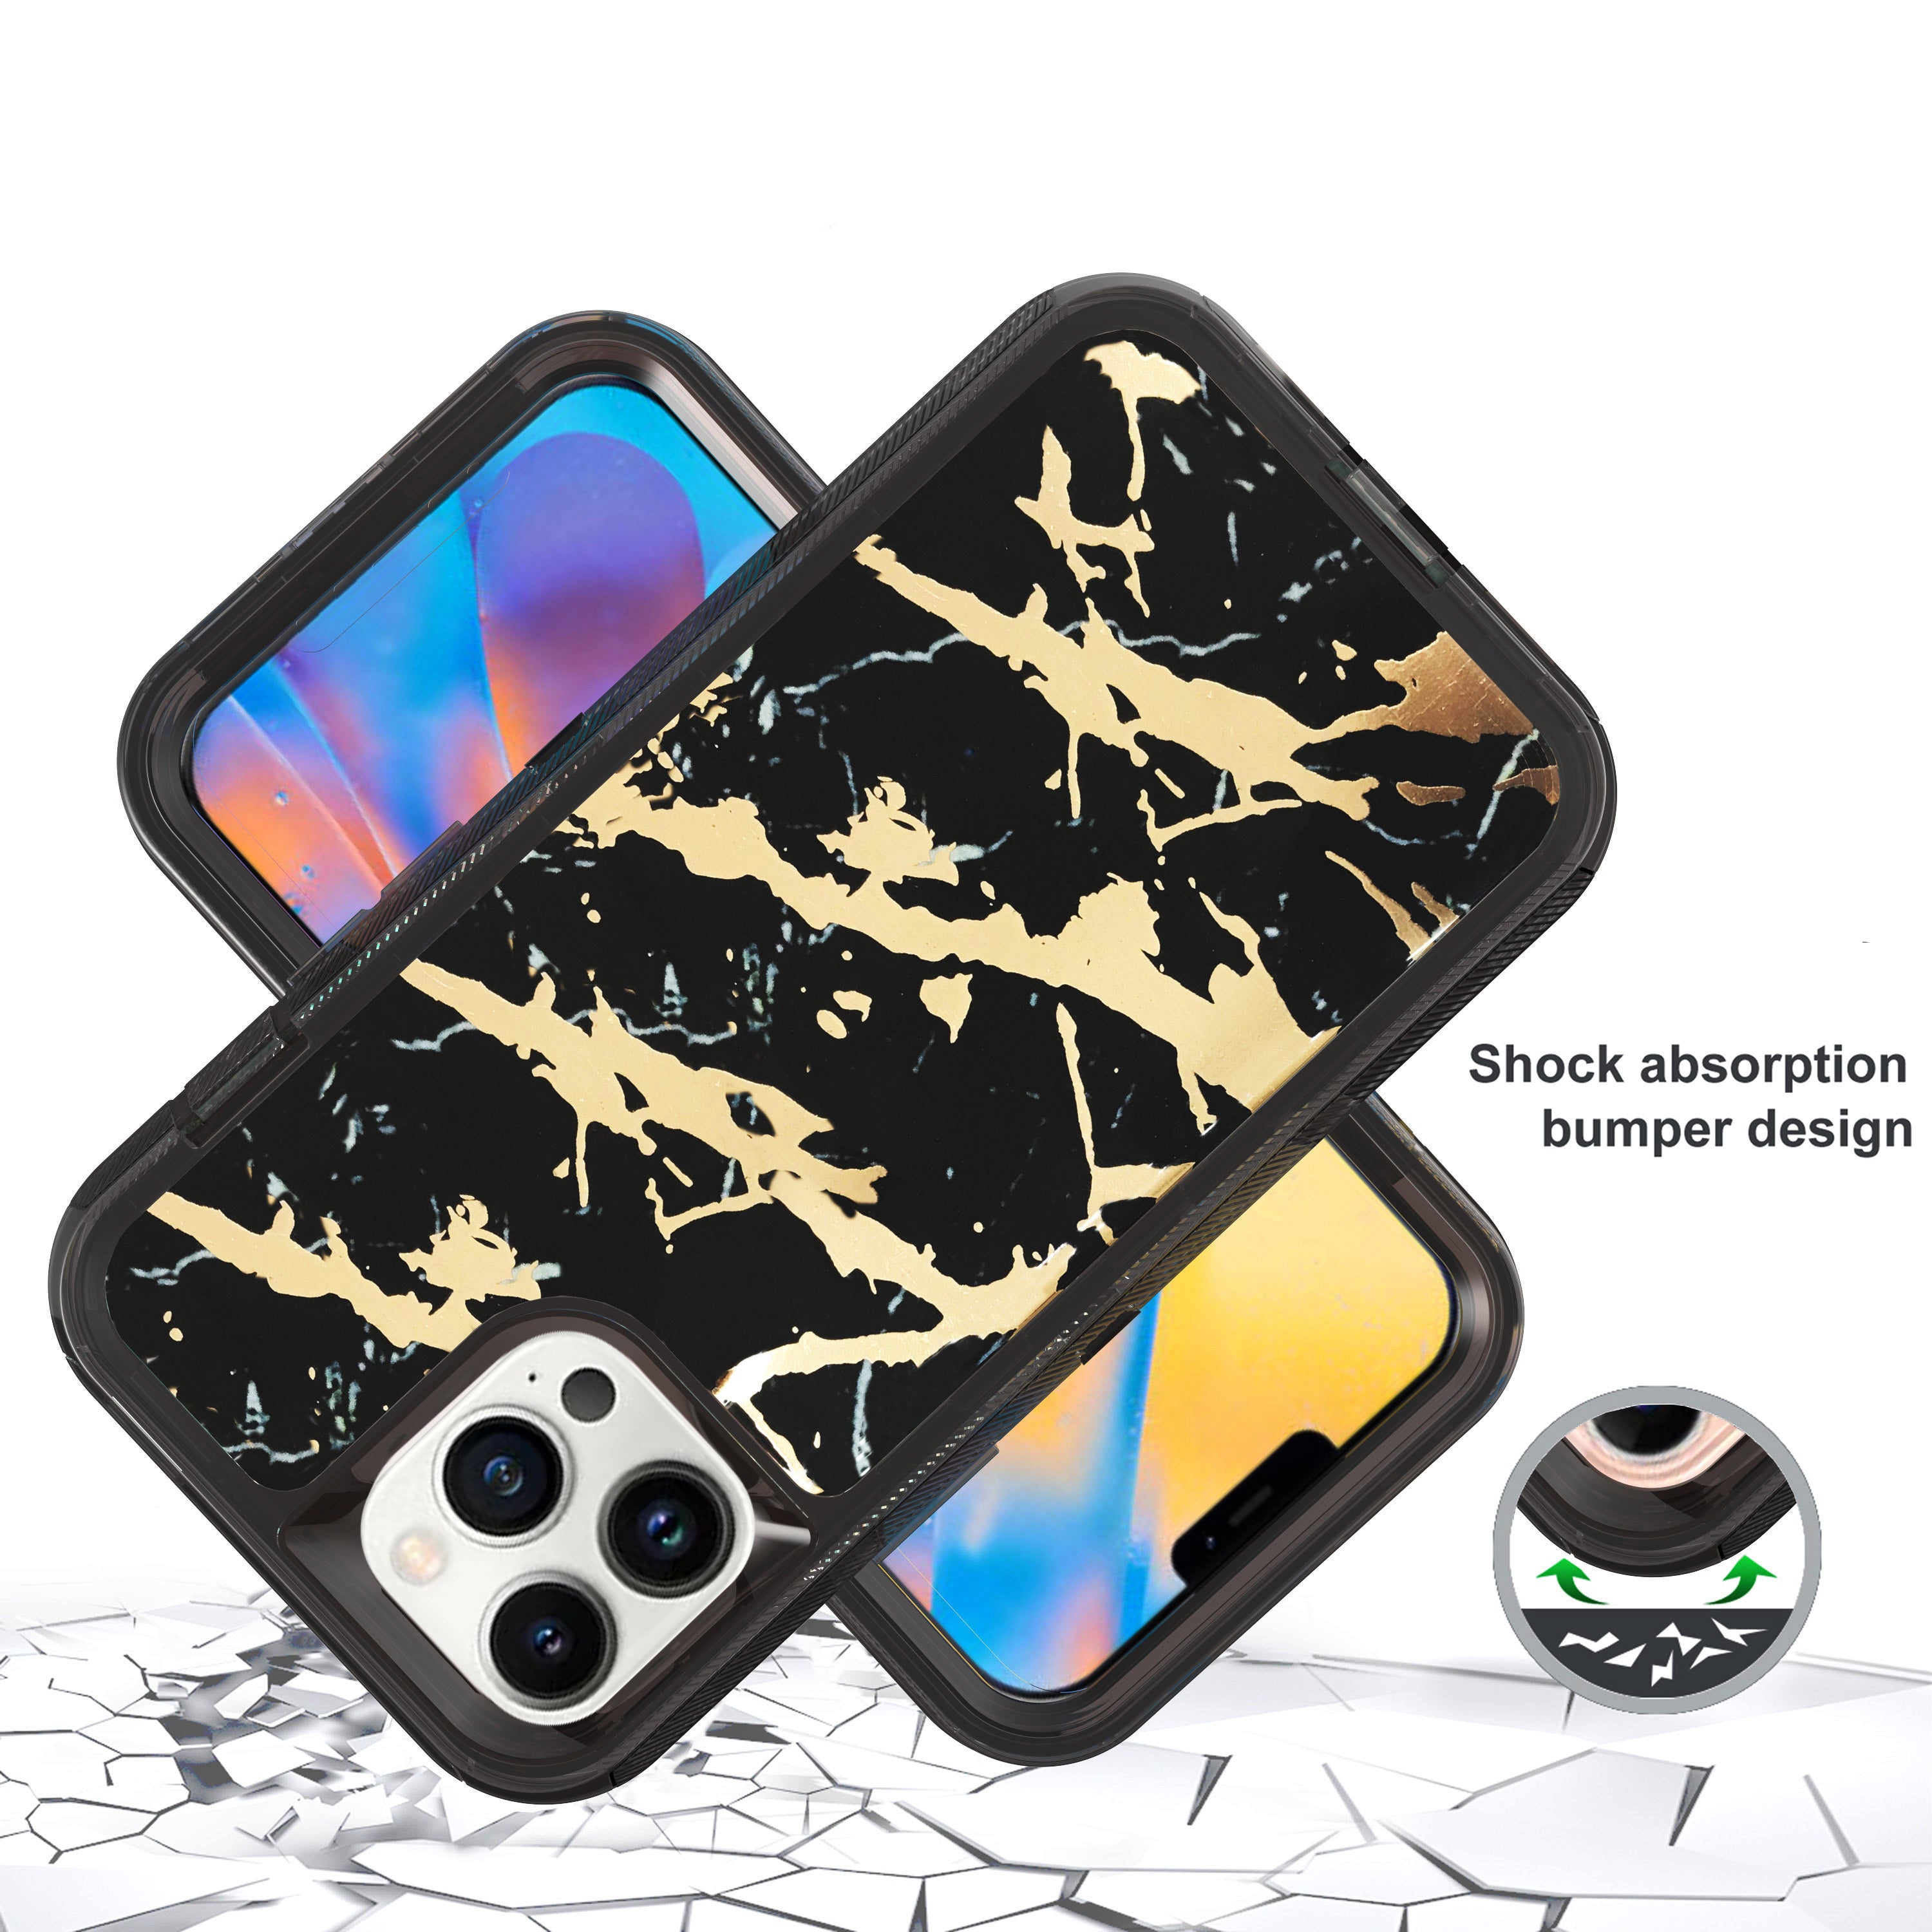 Clear Case for iPhone 12 Mini (5.4") Anti-Shock Durable Protective TPU Heavy Duty Marble case